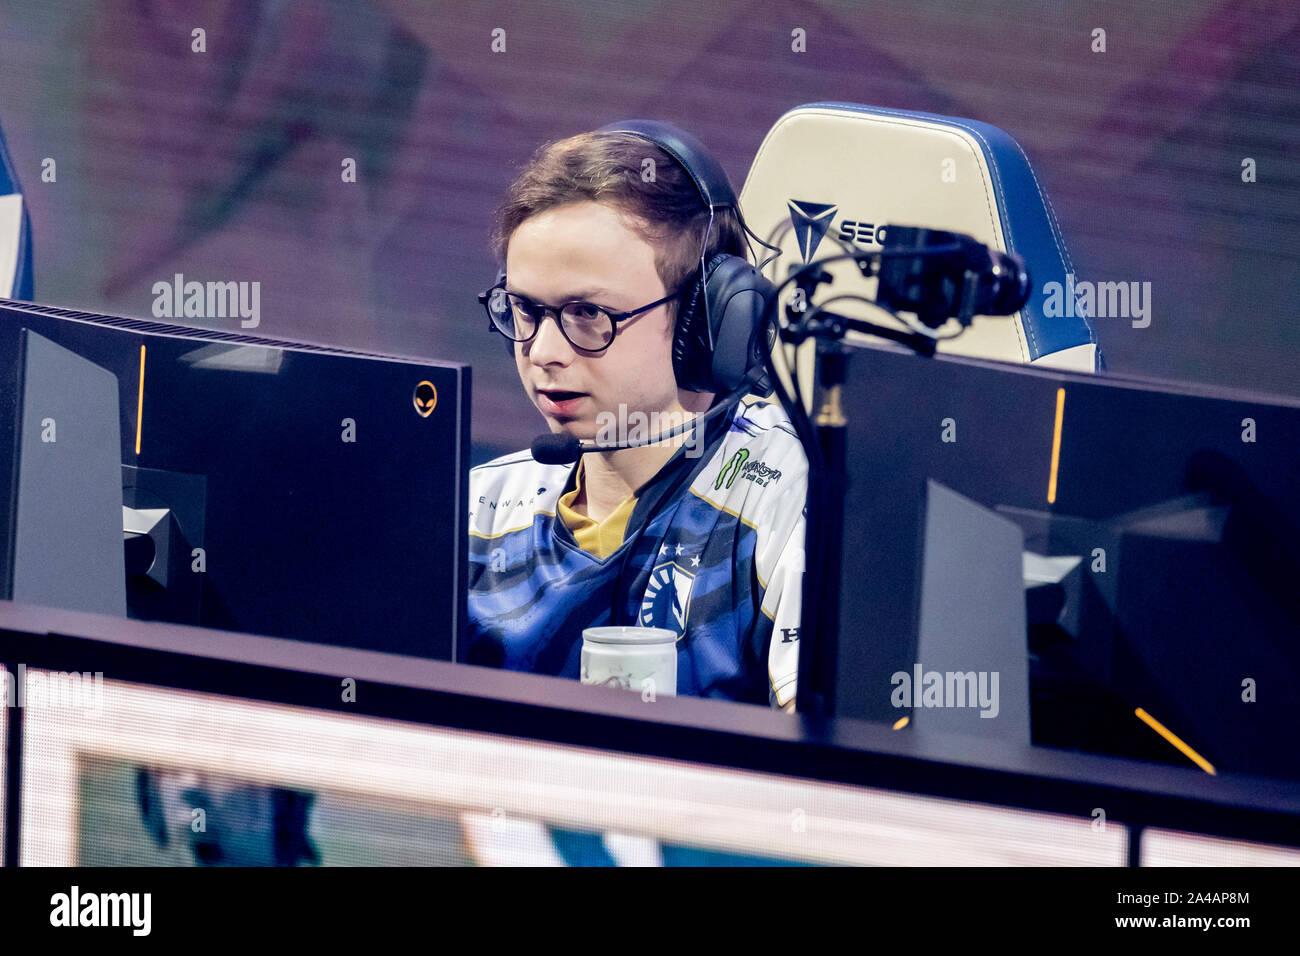 Berlin, Germany. 13th Oct, 2019. Nicolaj 'Jensen' Jensen, Danish e-athlete with Team Liquid, will compete in the group phase of the 'League of Legends' e-sports world championship at the Verti Music Hall. Credit: Christoph Soeder/dpa/Alamy Live News Stock Photo